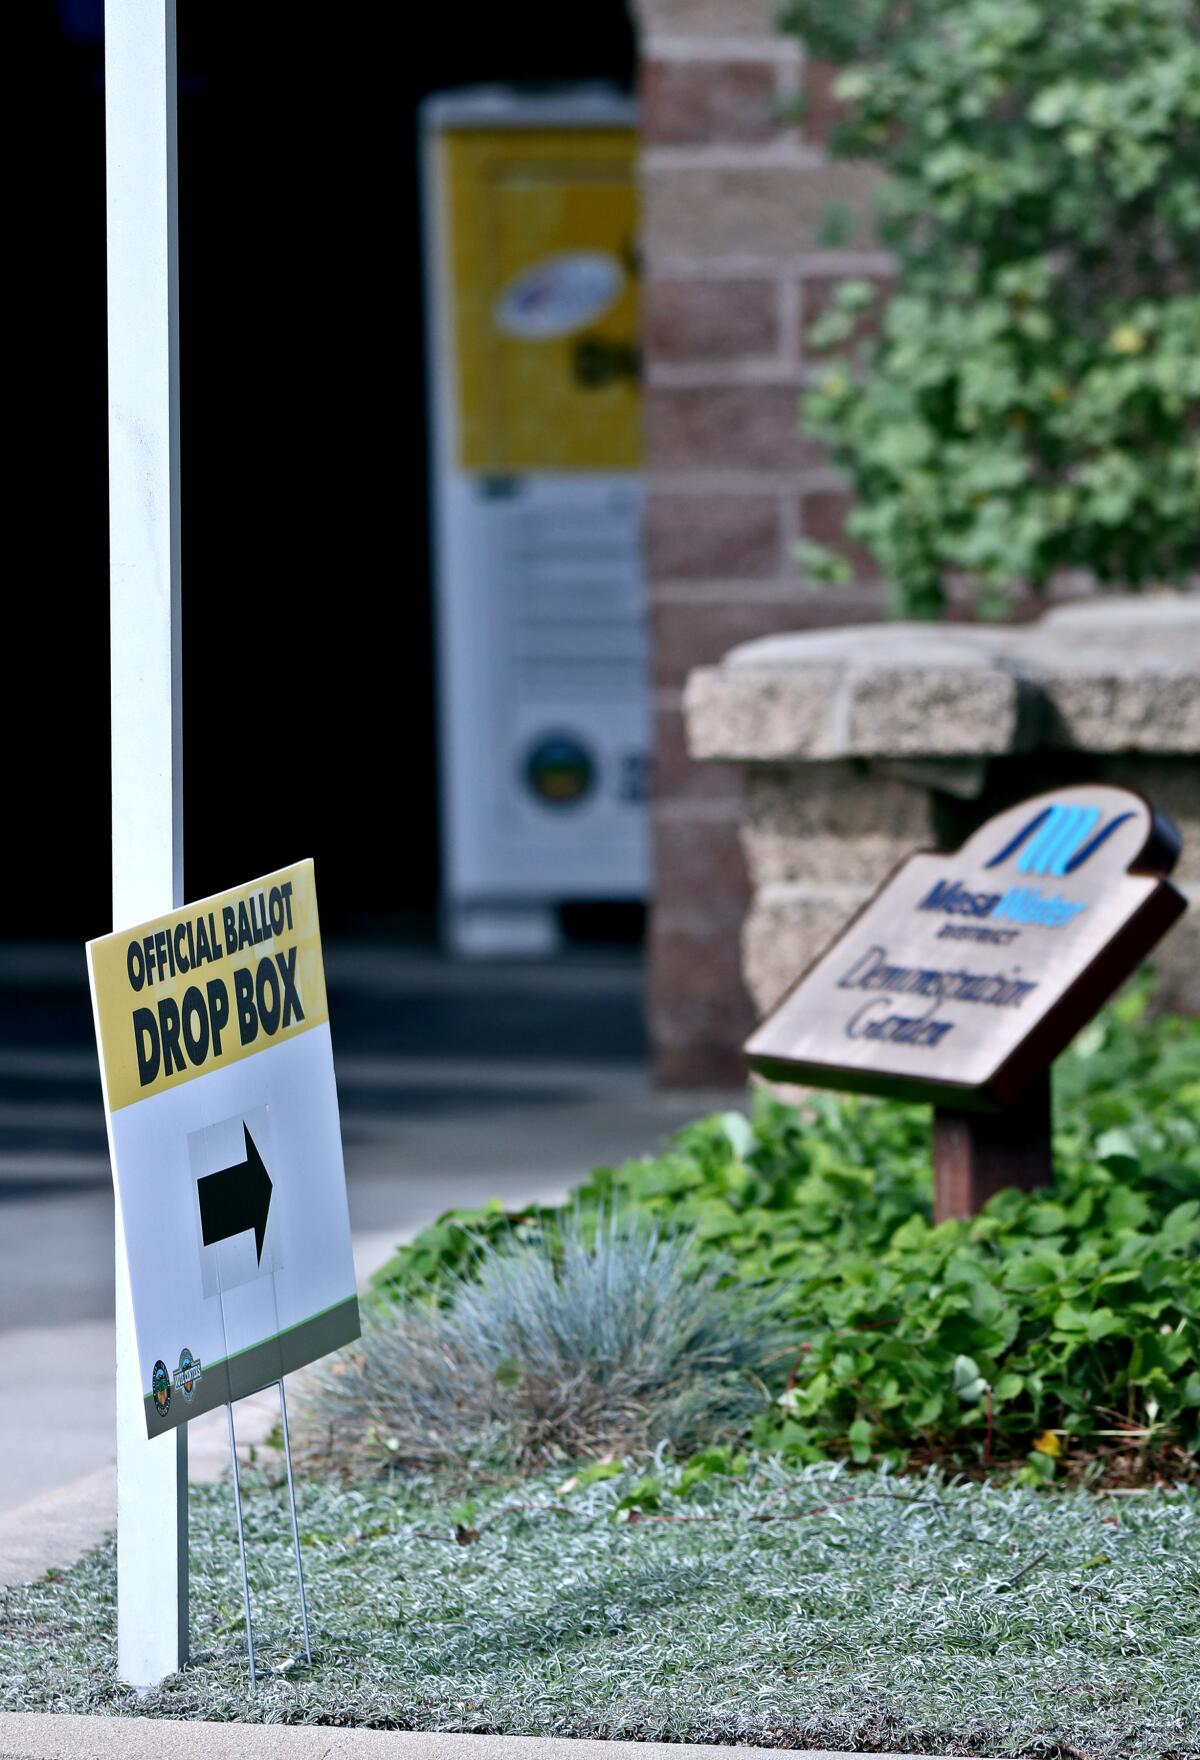 A sign points to an official ballot box located near the front door of the Mesa Water District.